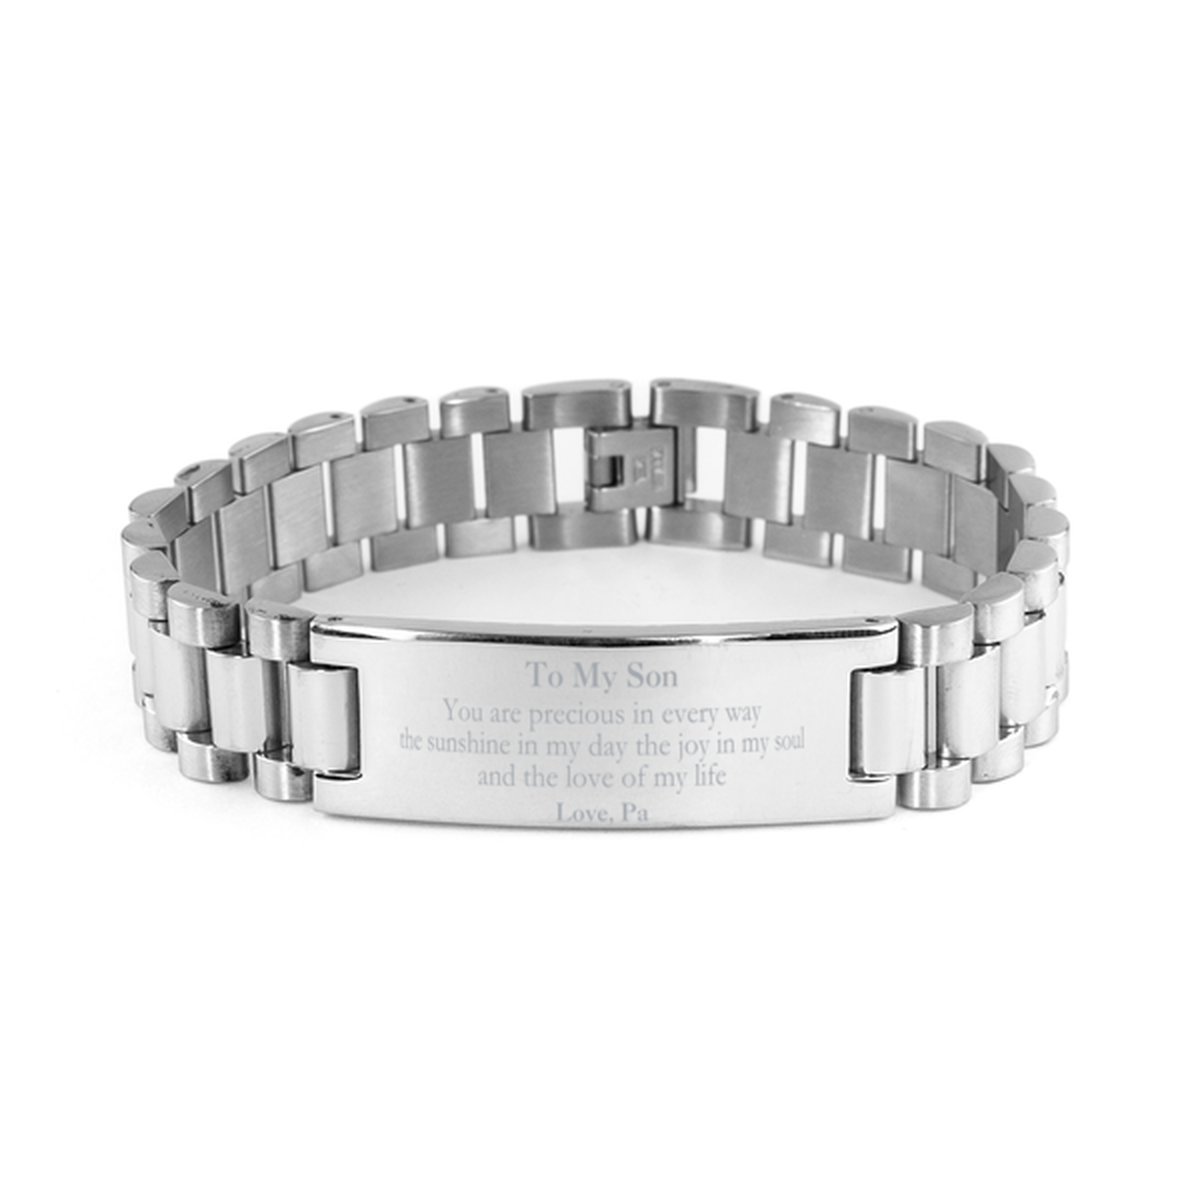 Graduation Gifts for Son Ladder Stainless Steel Bracelet Present from Pa, Christmas Son Birthday Gifts Son You are precious in every way the sunshine in my day. Love, Pa